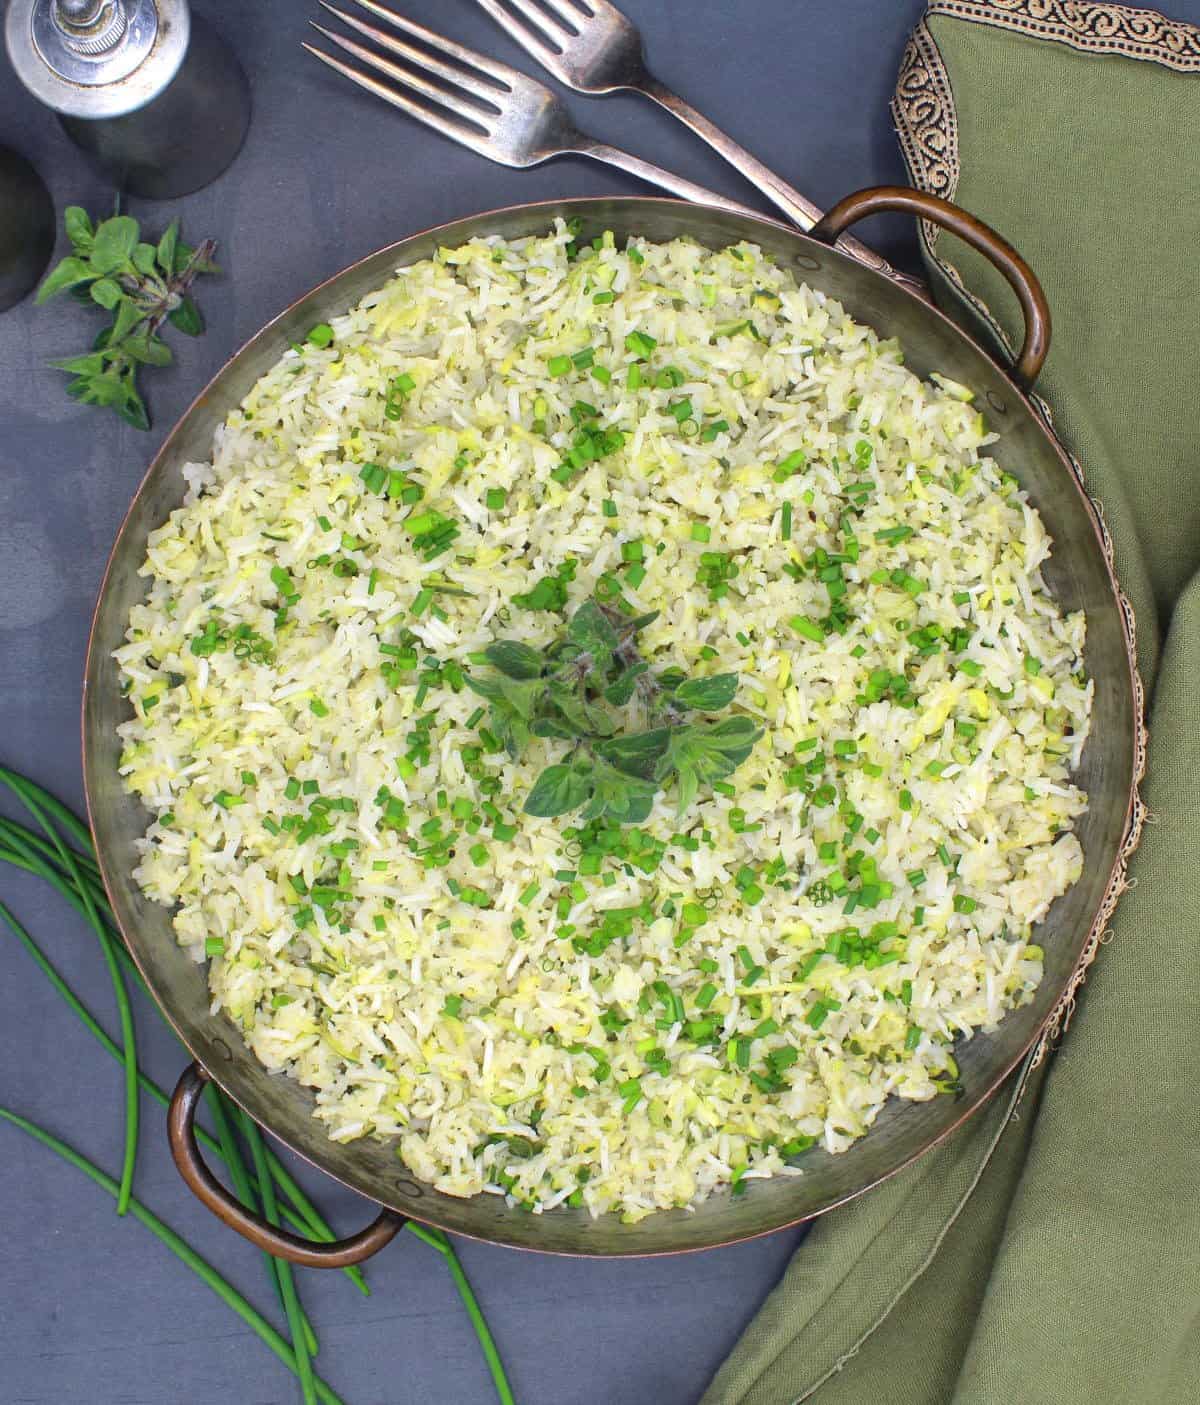 Overhead view of garlicky zucchini rice in a copper pan with chives and oregano garnish with more chives, oregano, forks and a salt and pepper shaker in background.